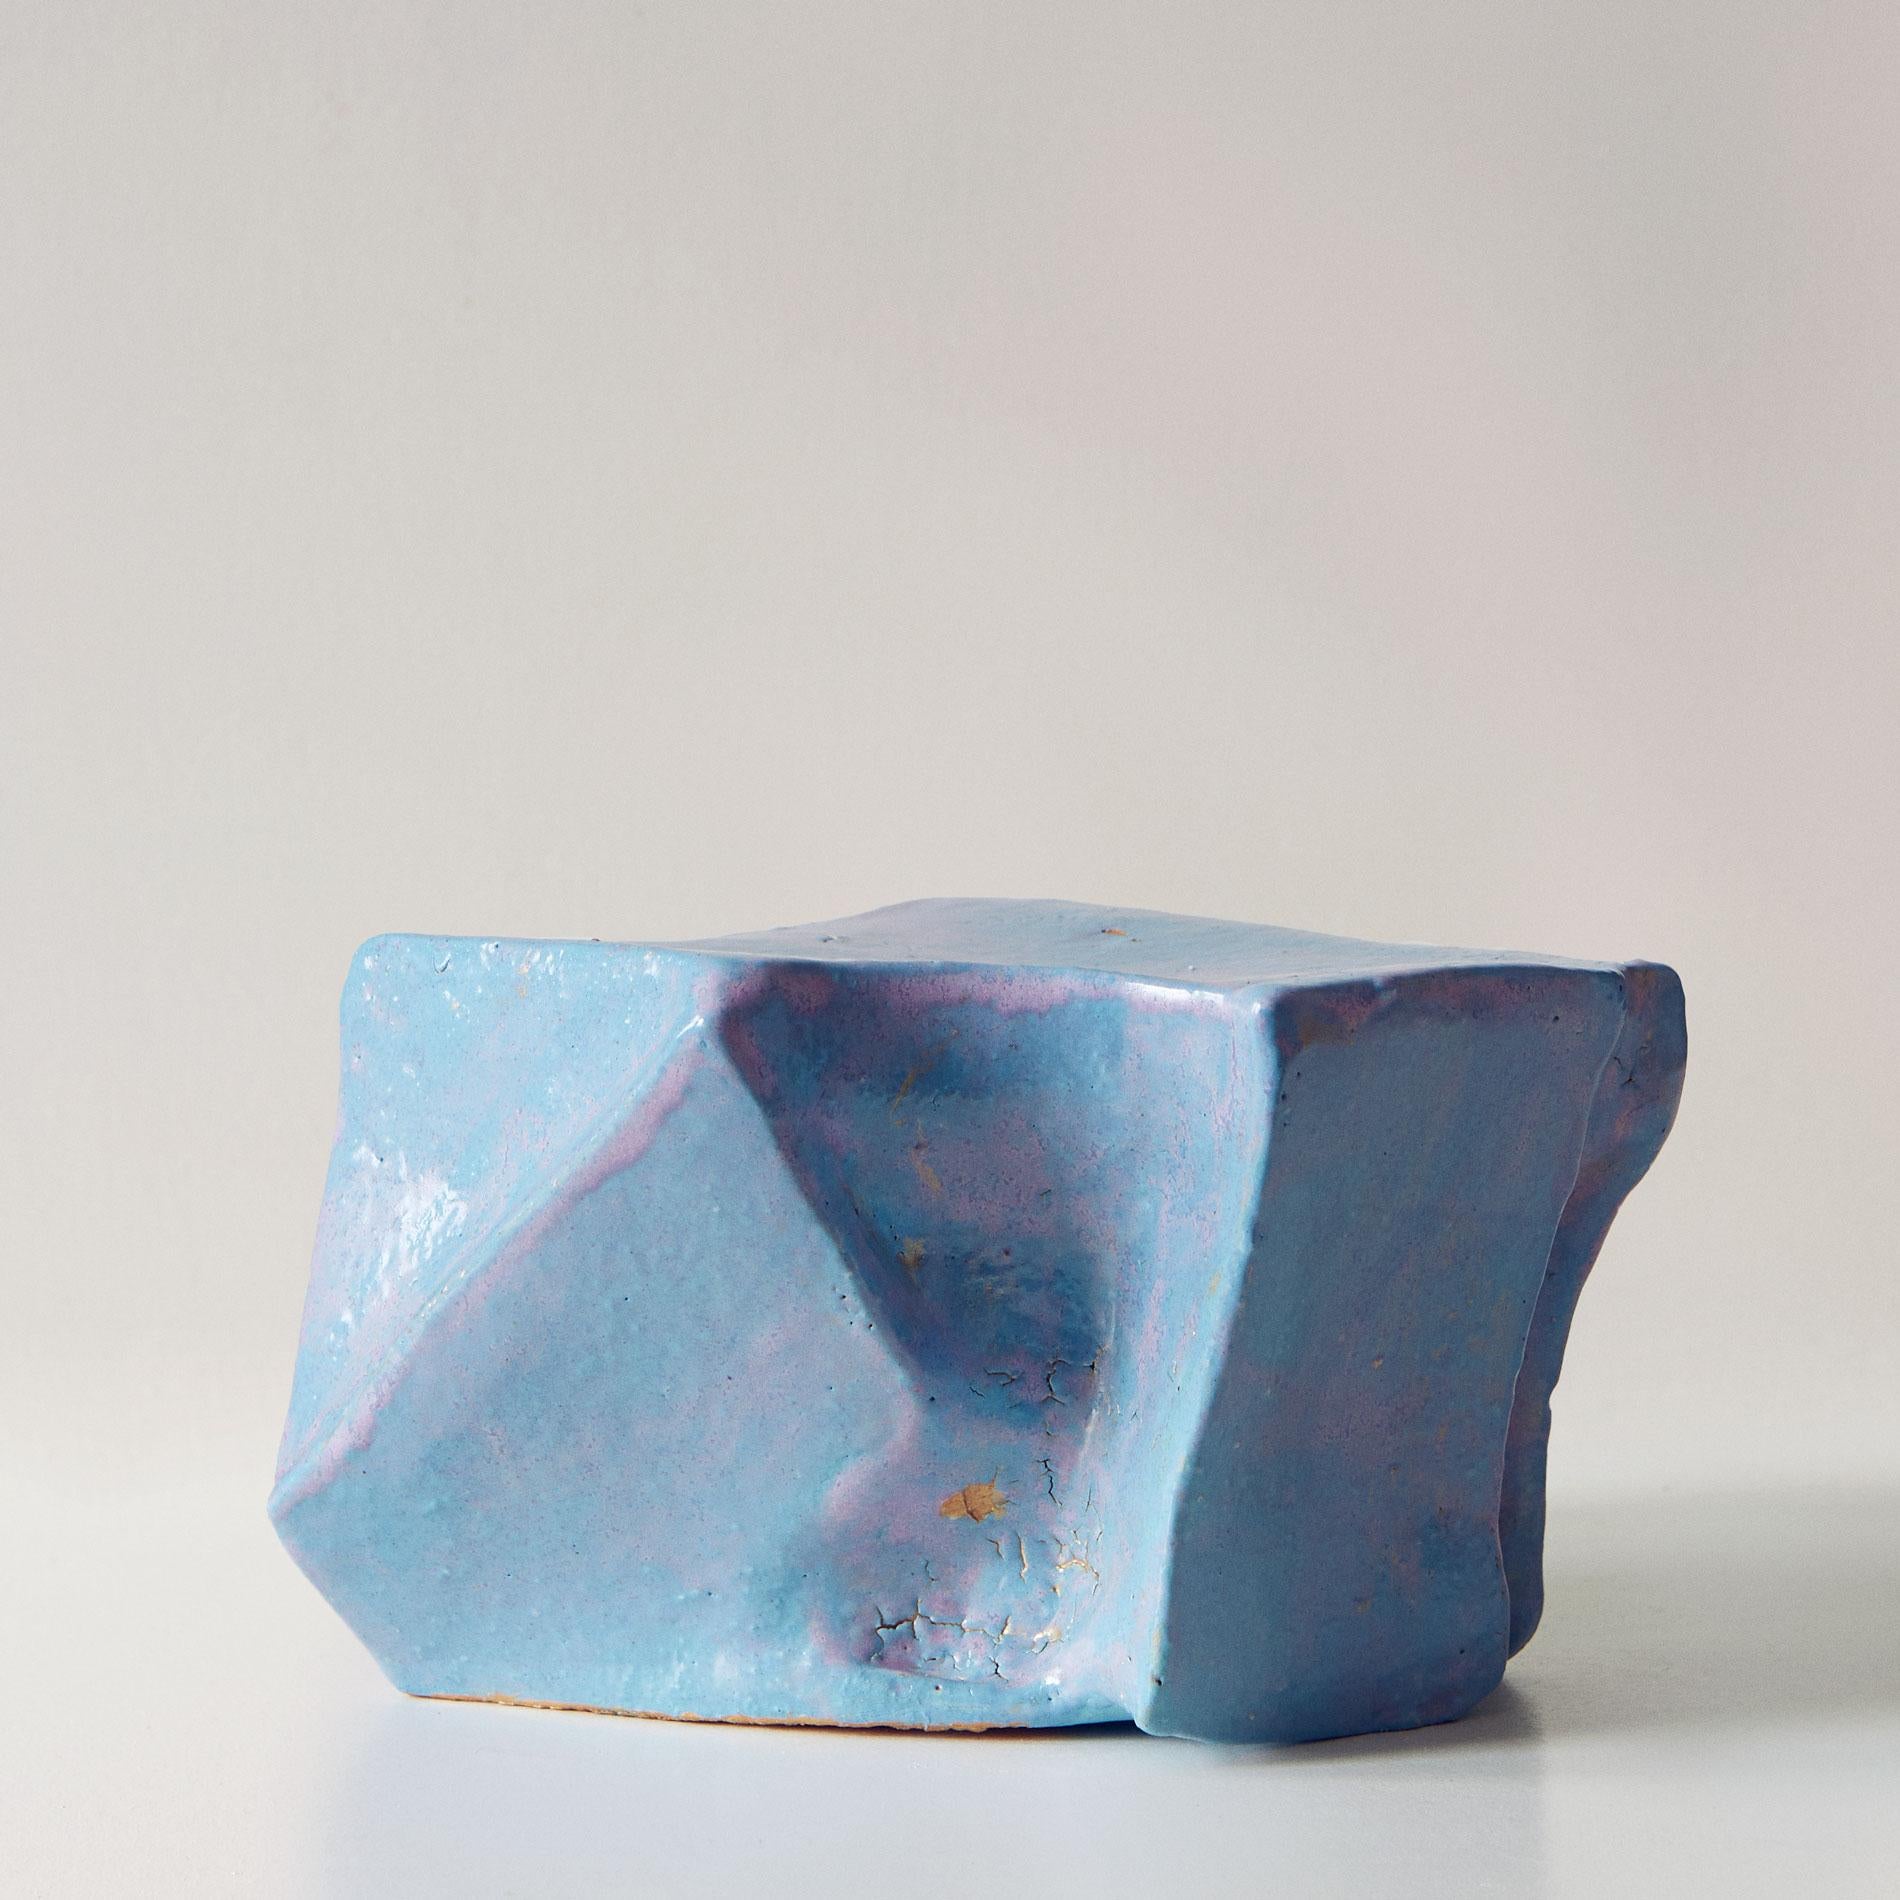 Beatrice Galletley Abstract Sculpture - Shapeshifter XV - Modern Minimal Abstract Blue Ceramic Sculpture